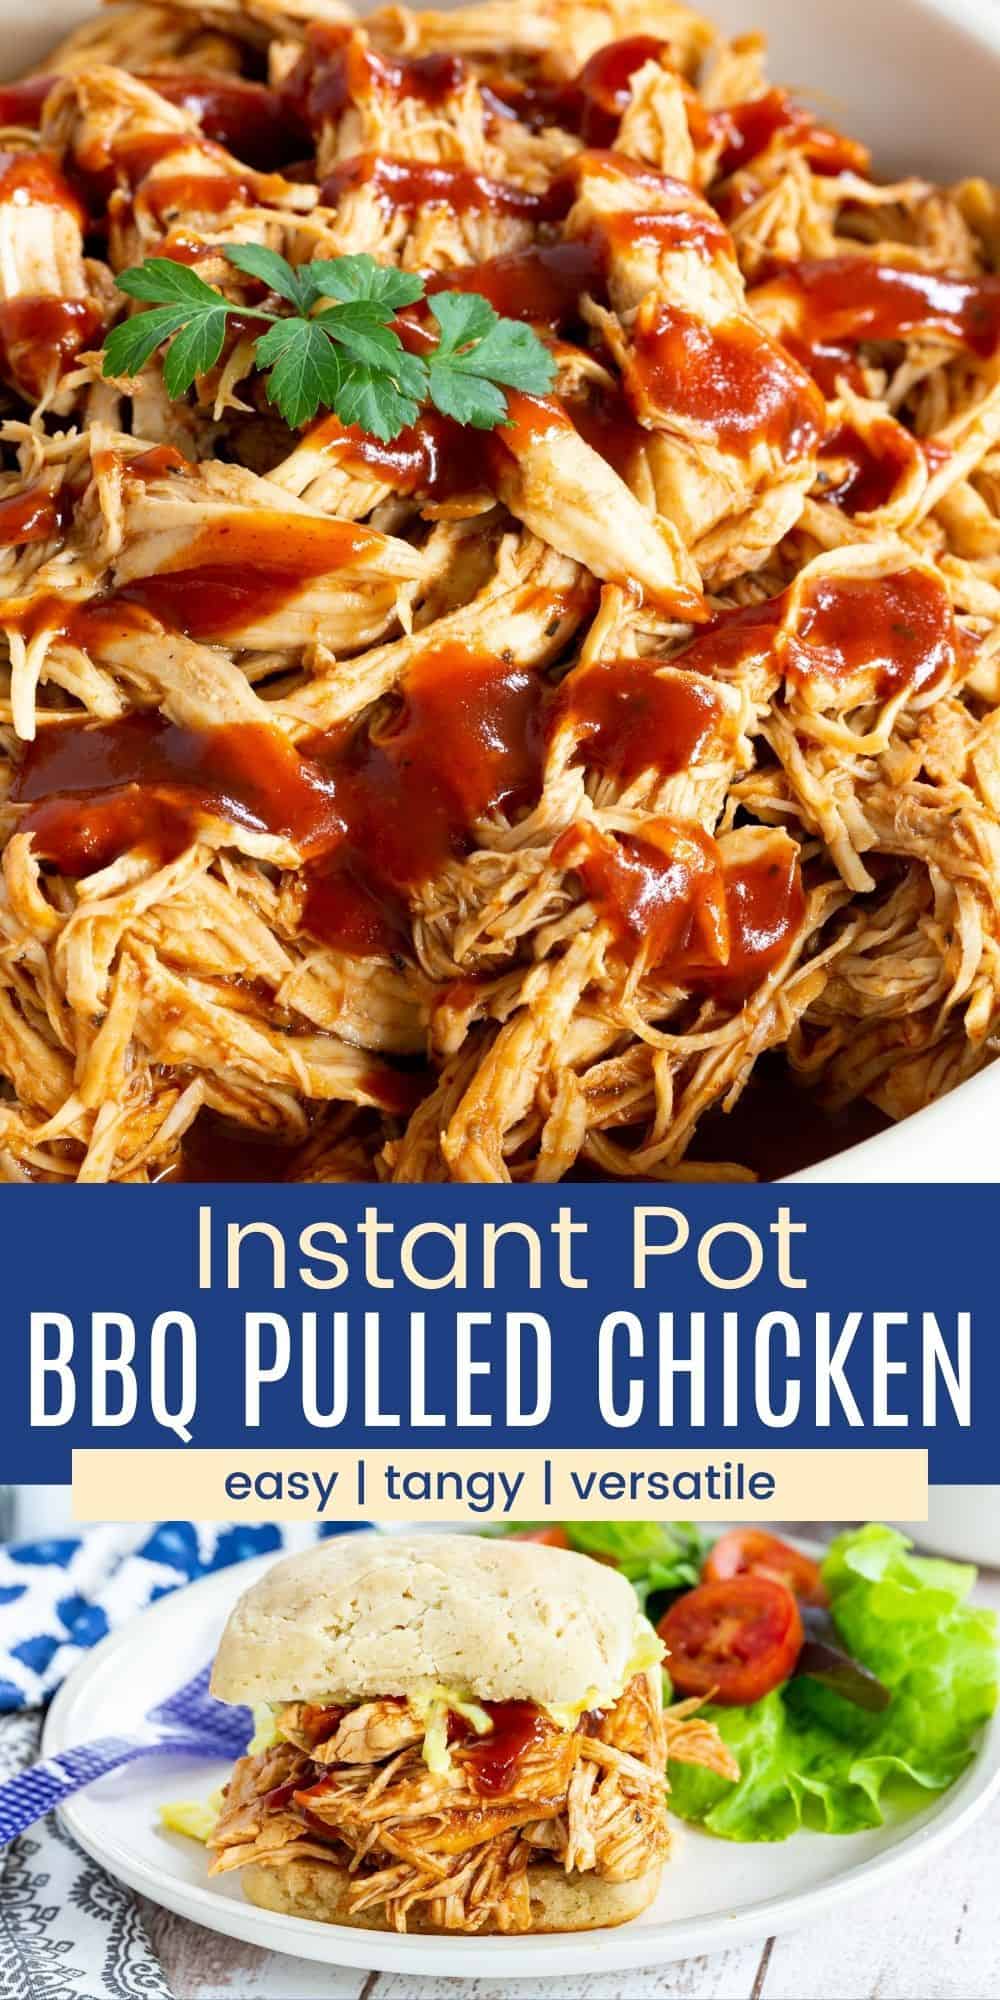 Instant Pot BBQ Pulled Chicken | Cupcakes & Kale Chips